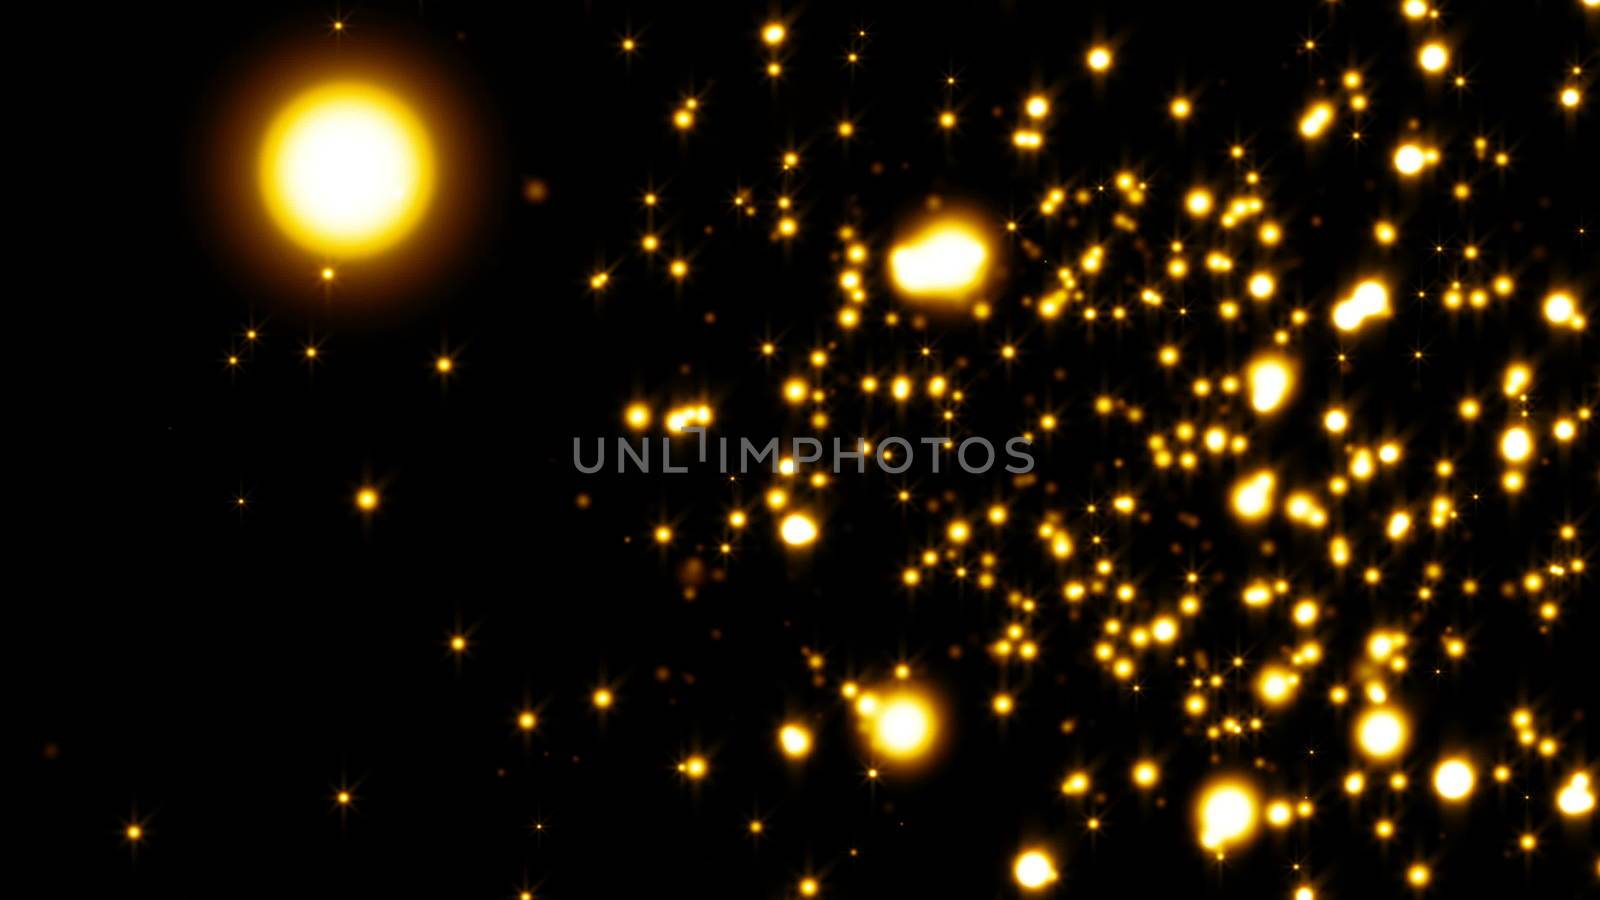 Glittering particles sparkle and drift along on a soft current. Gold particles